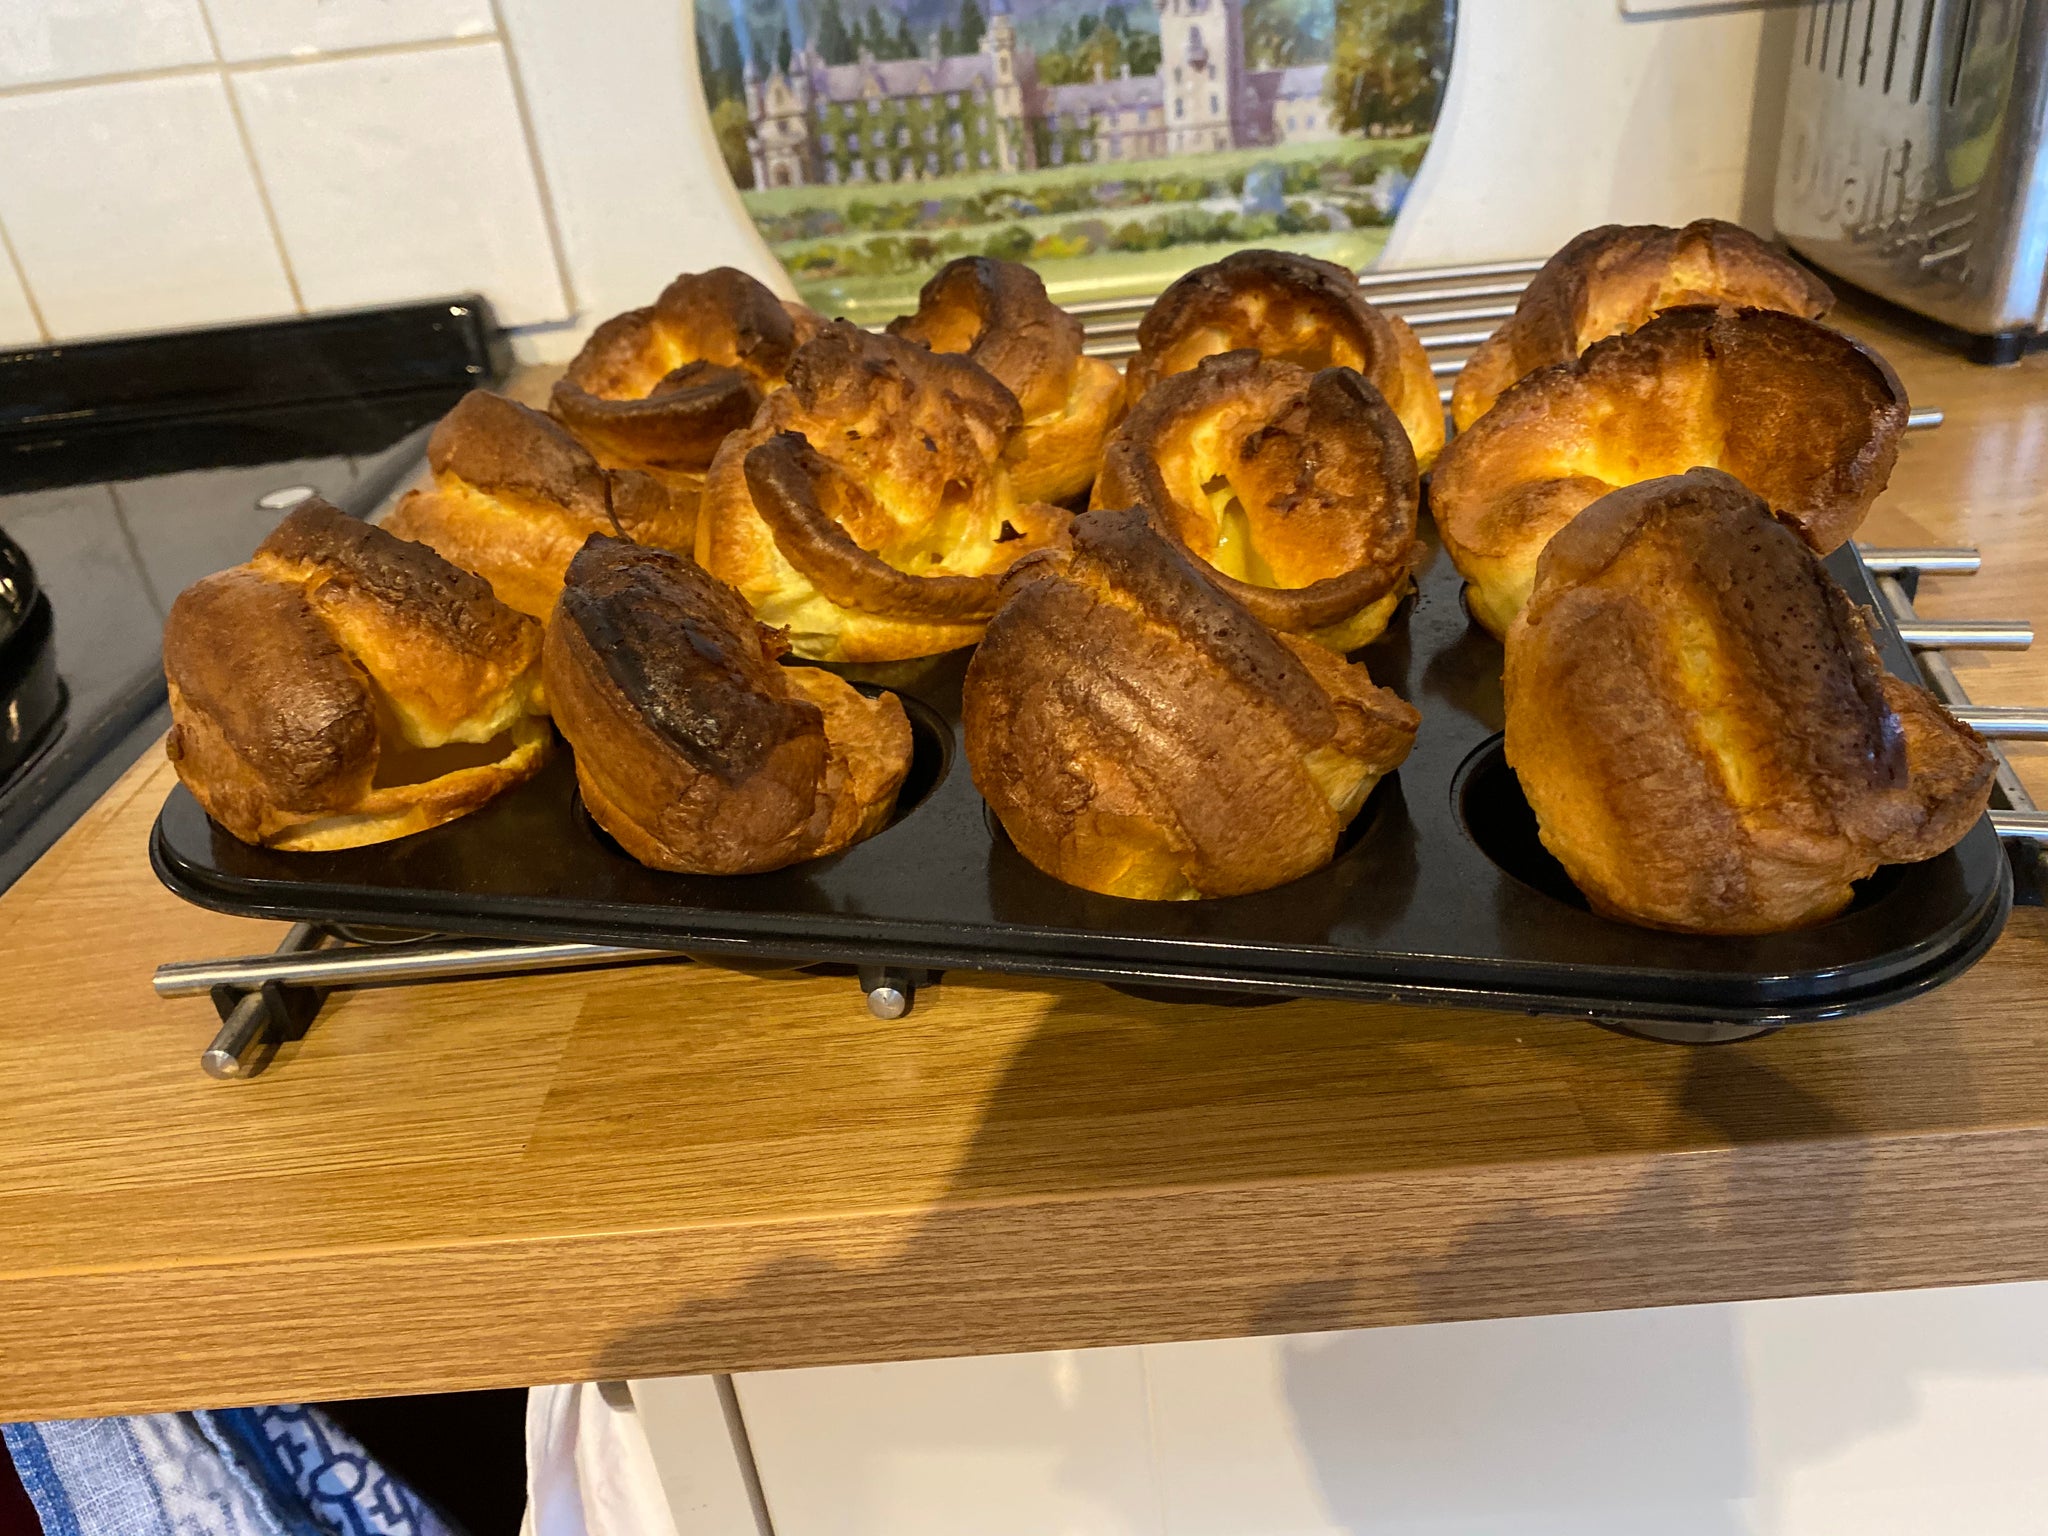 Aga yorkshire puds